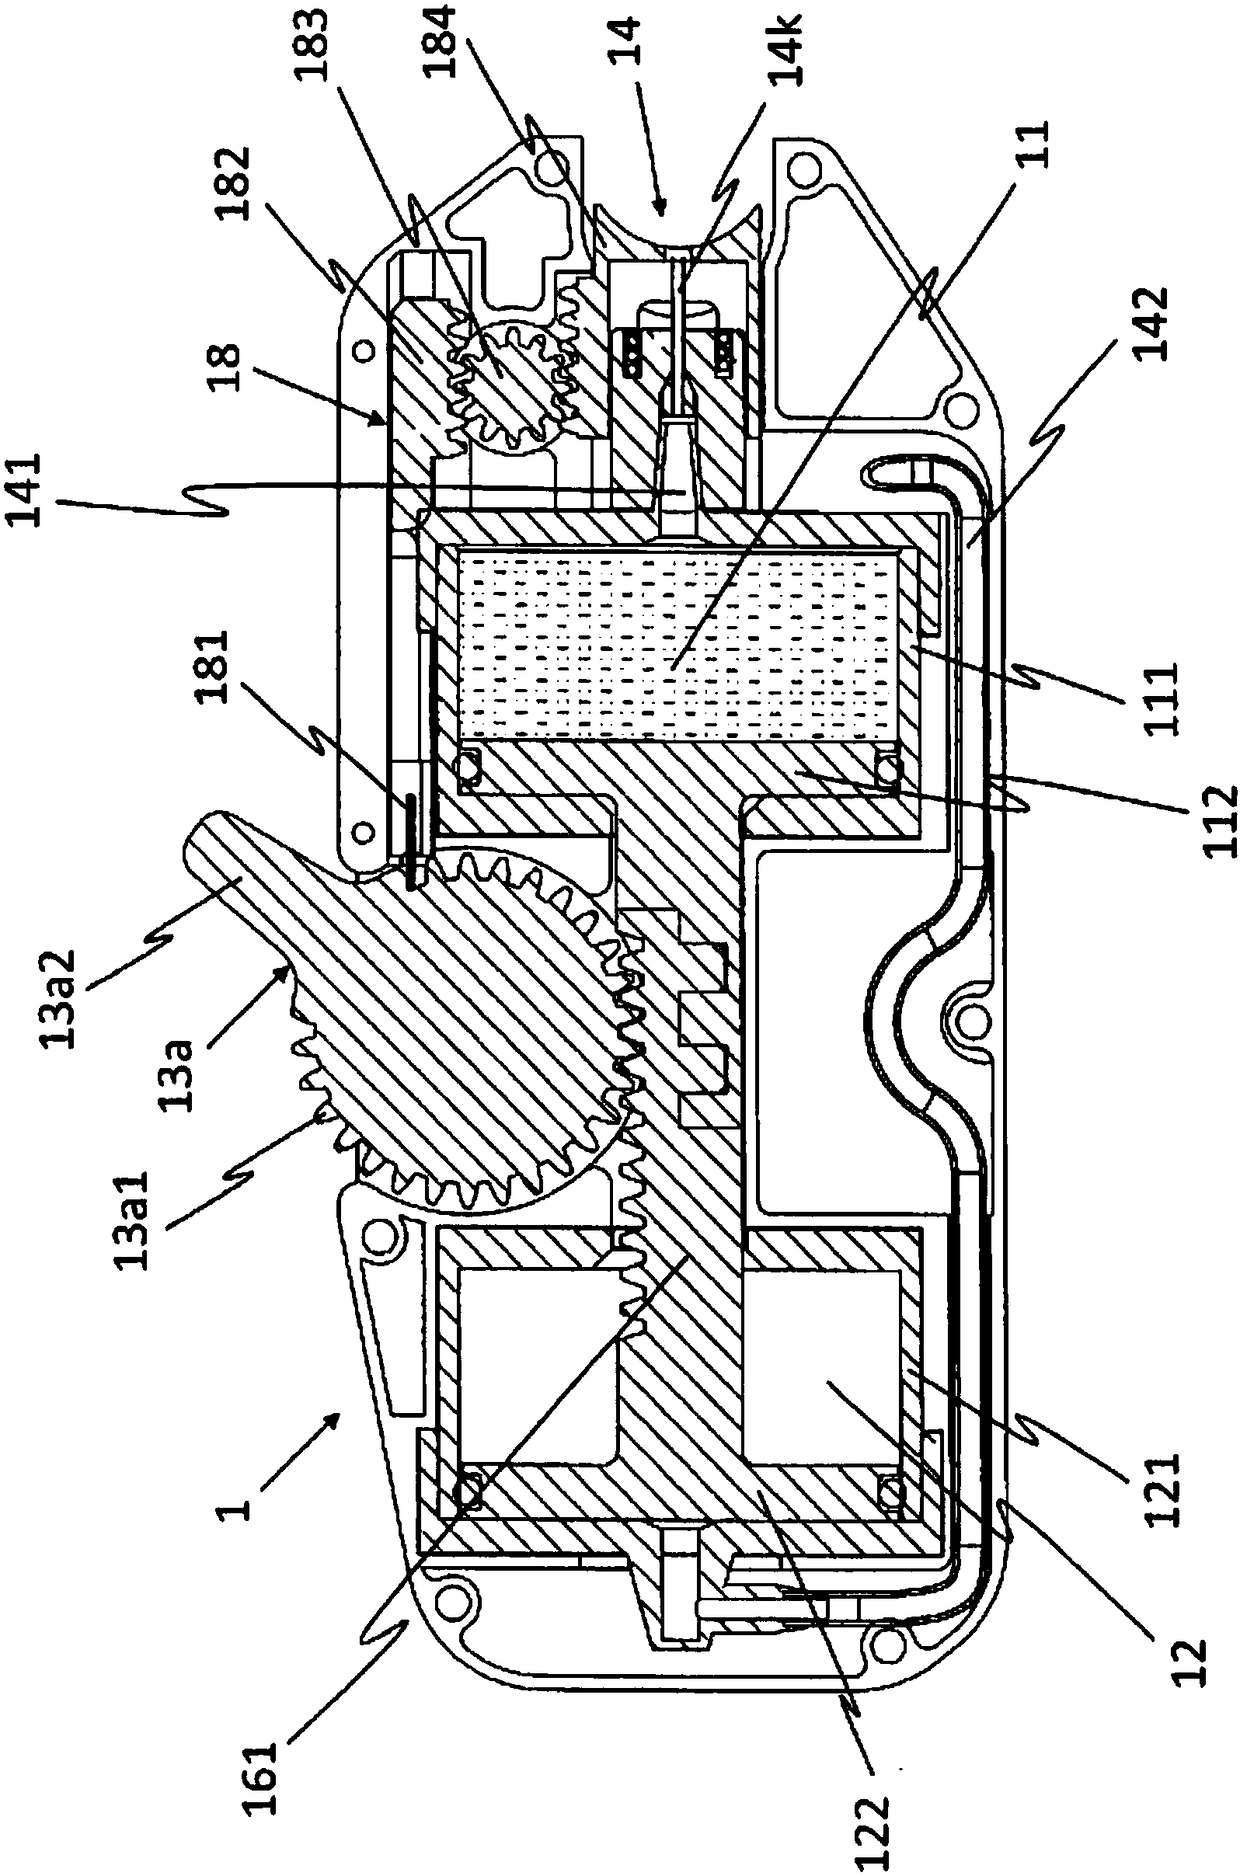 Device and method for filling an electric cigarette